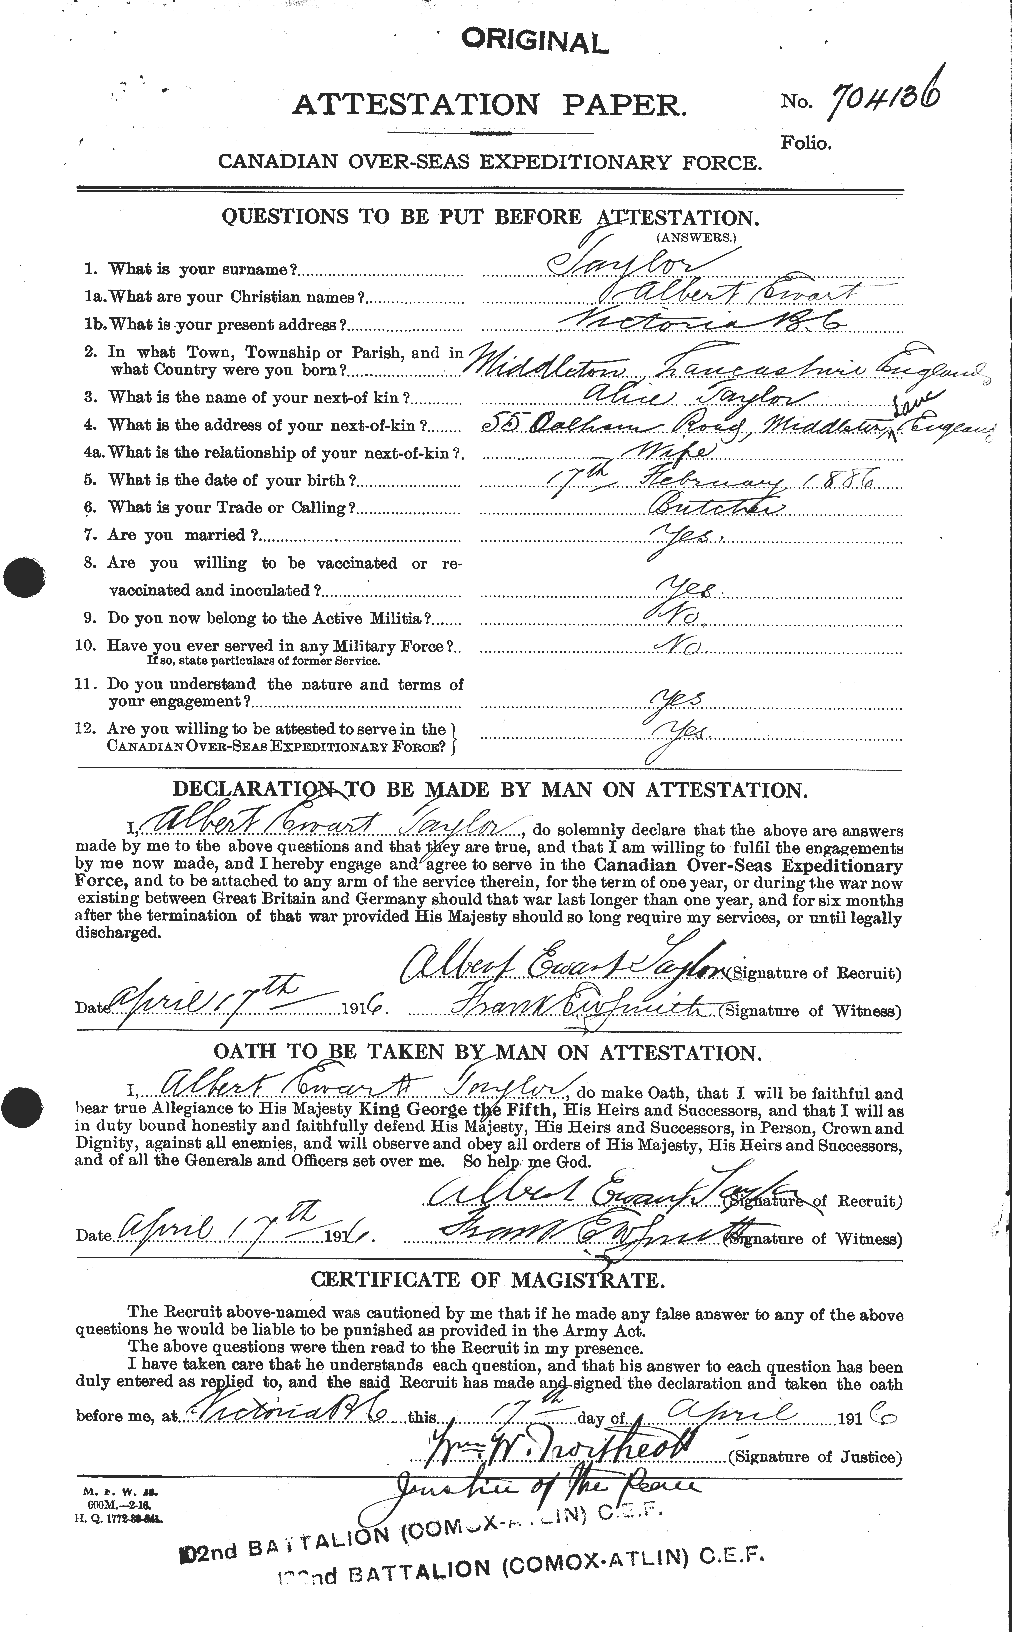 Personnel Records of the First World War - CEF 626110a